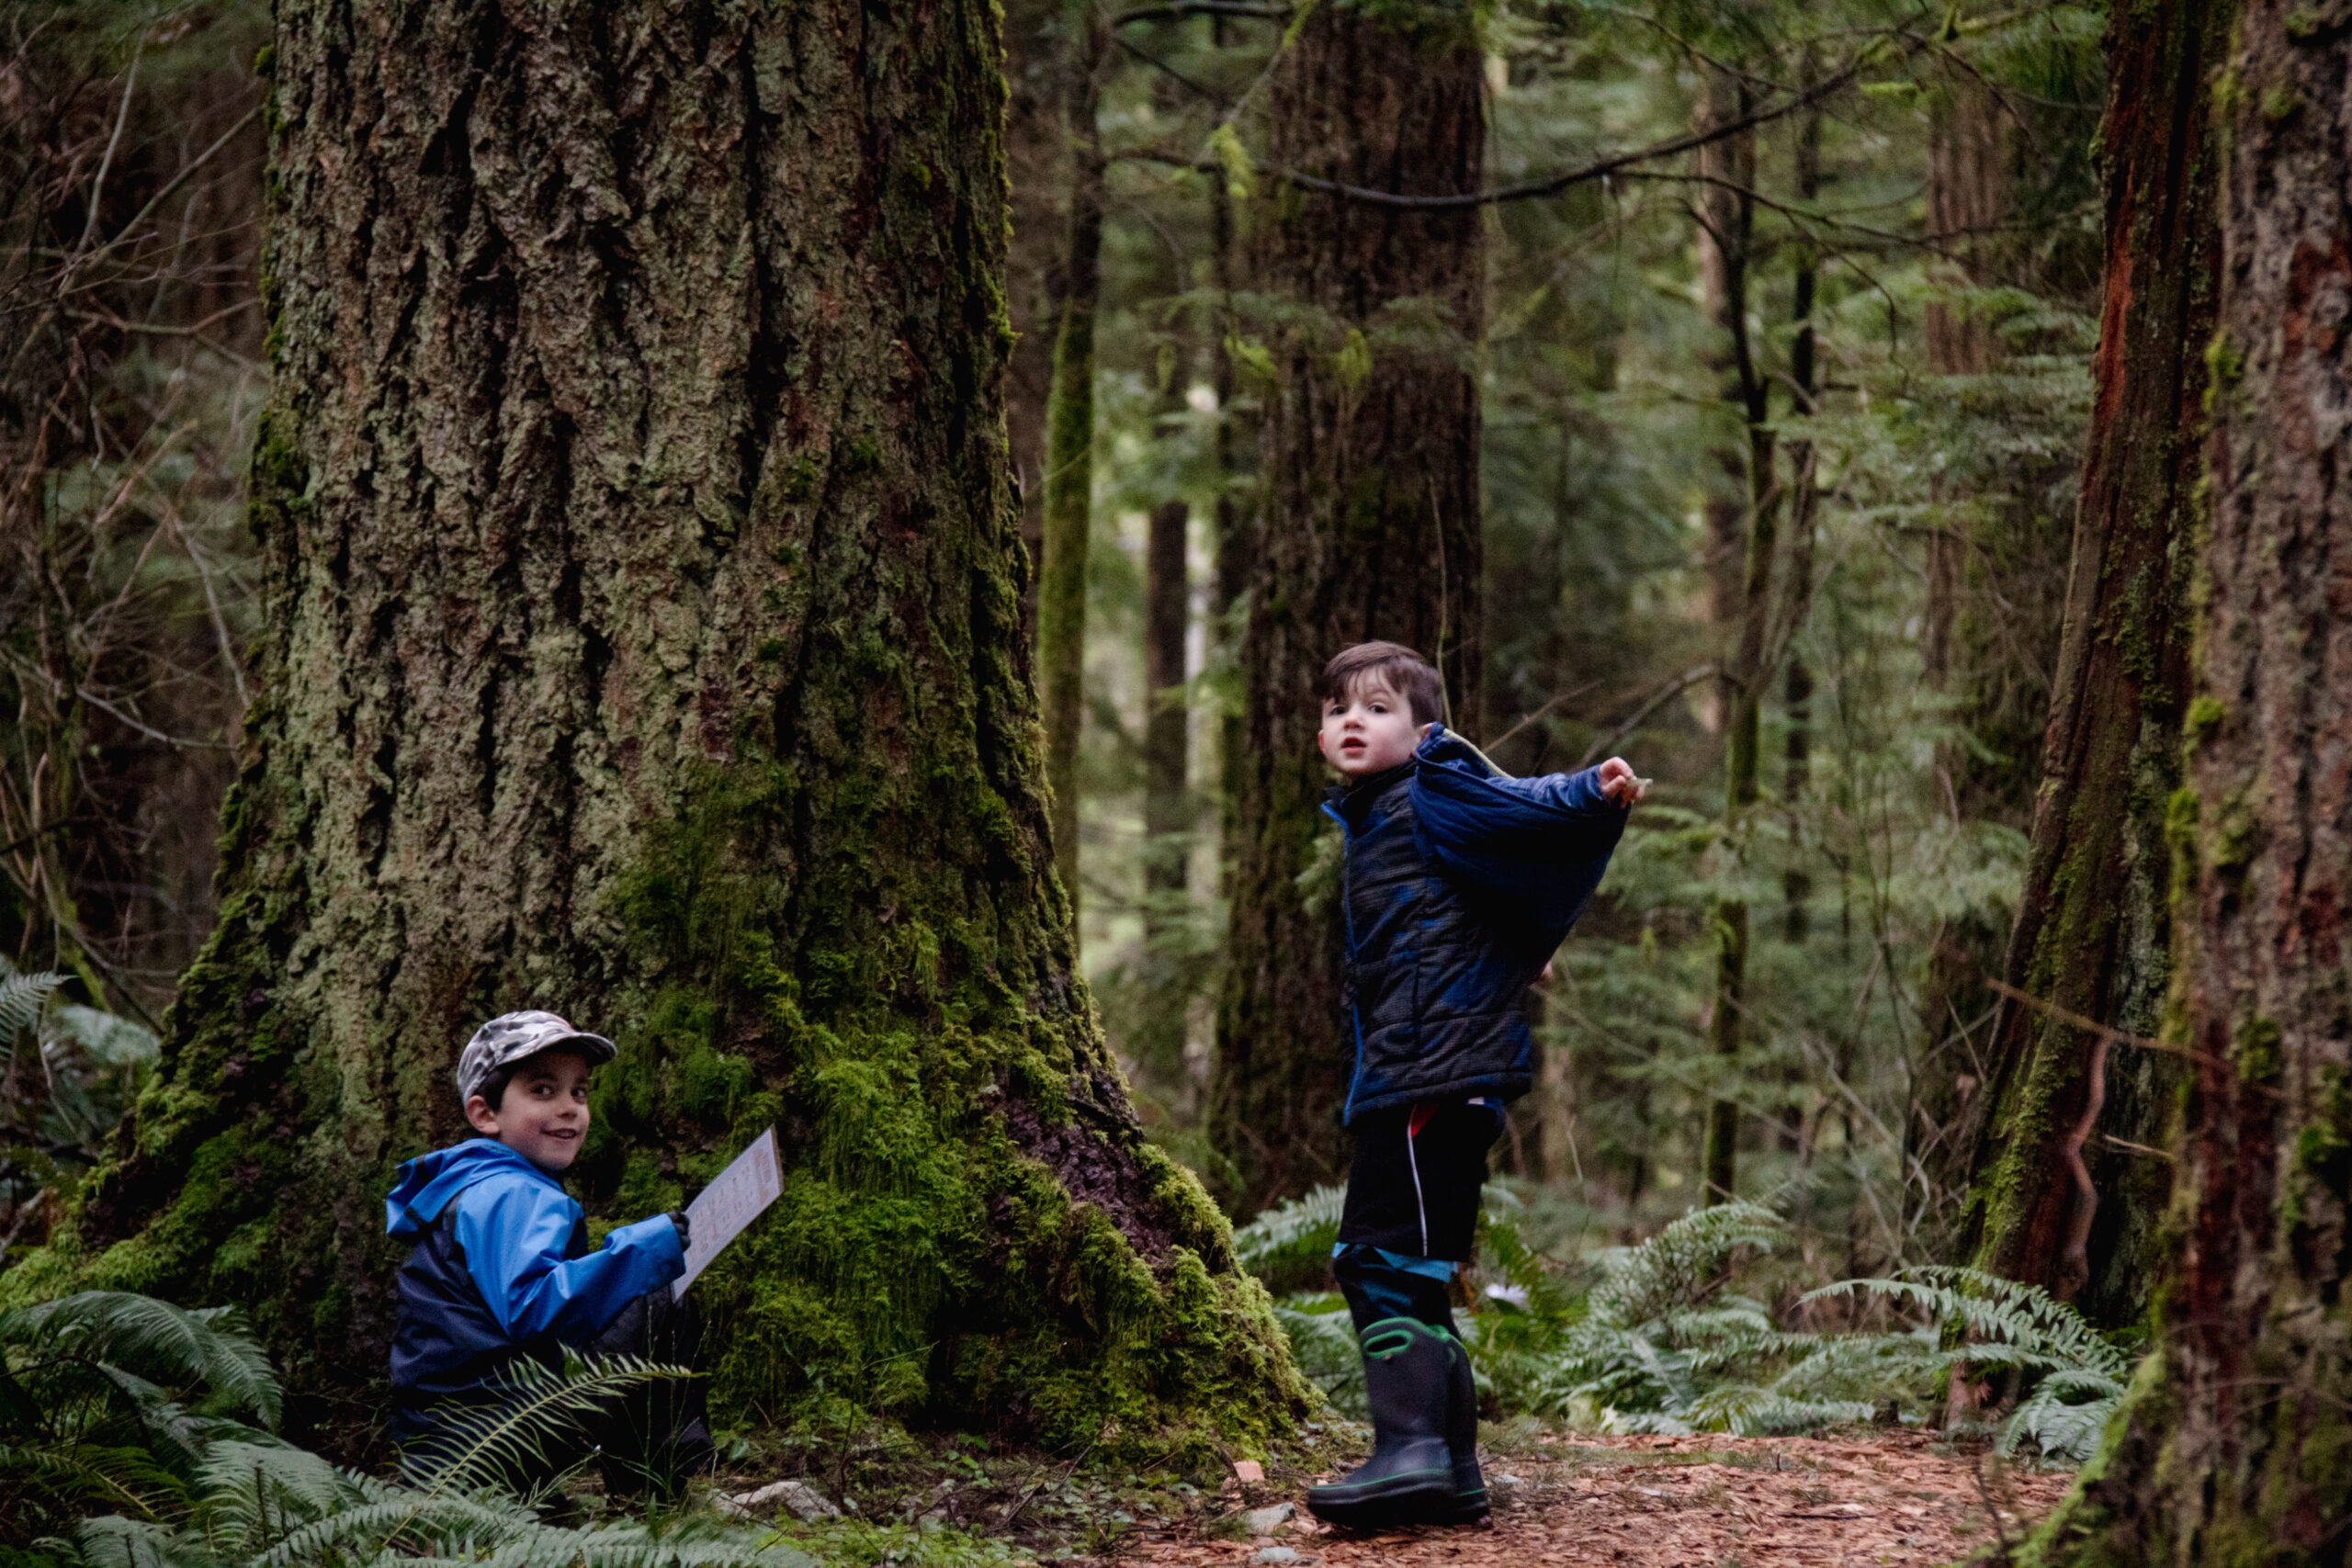 Two young boys in blue jackets standing in the forest next to a large tree.